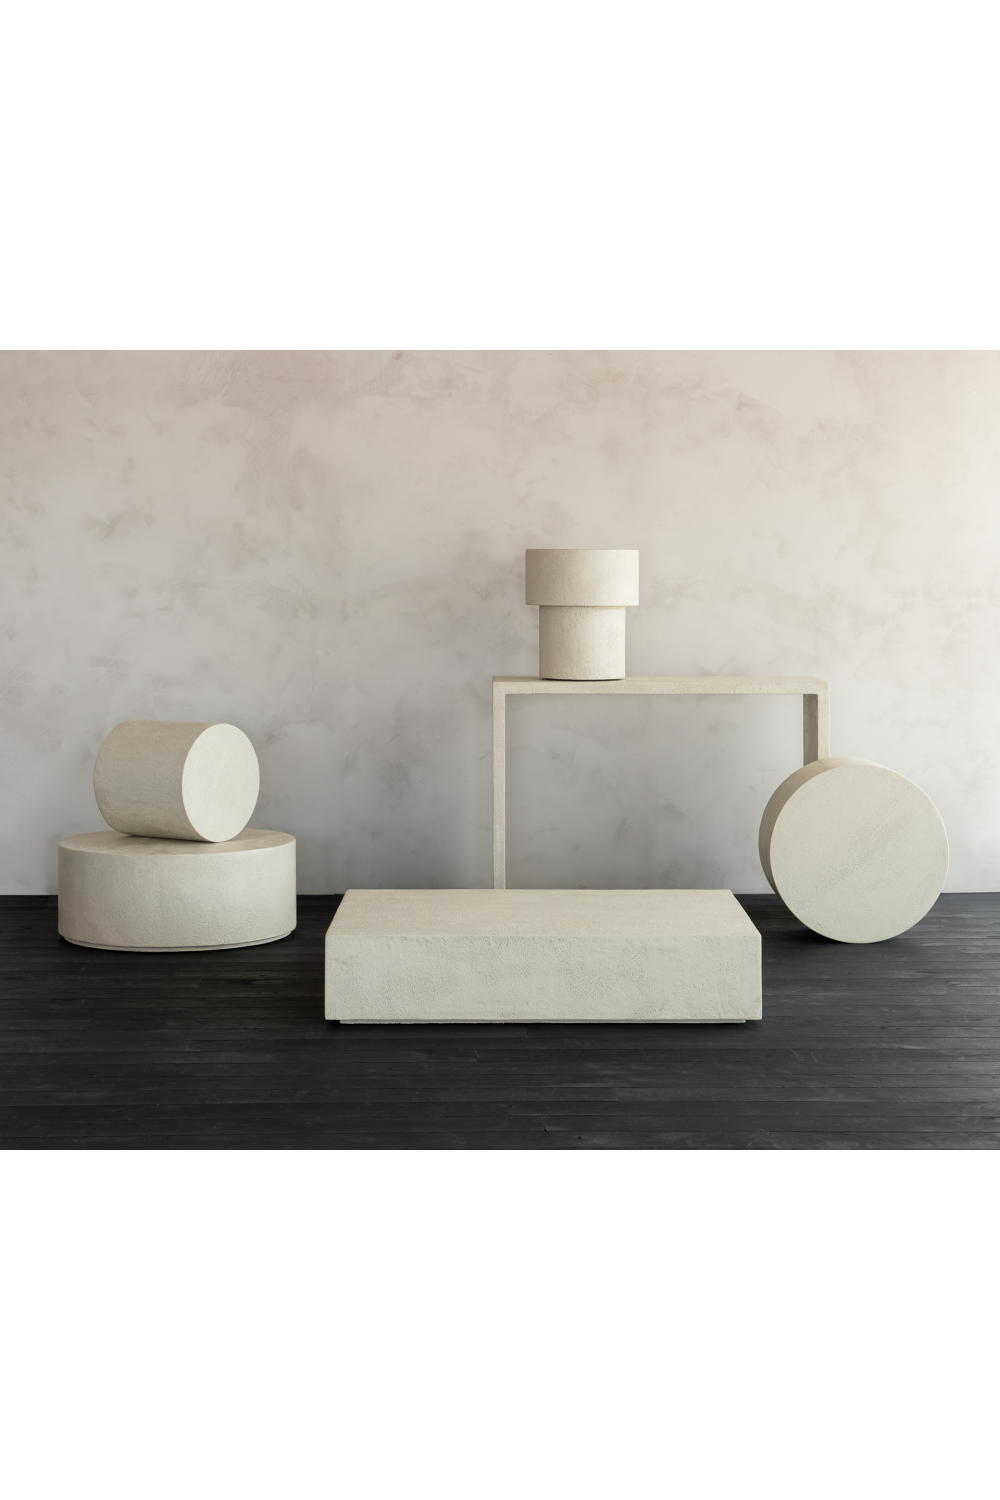 Round Off-White Coffee Table | Ethnicraft Elements | Oroa.com